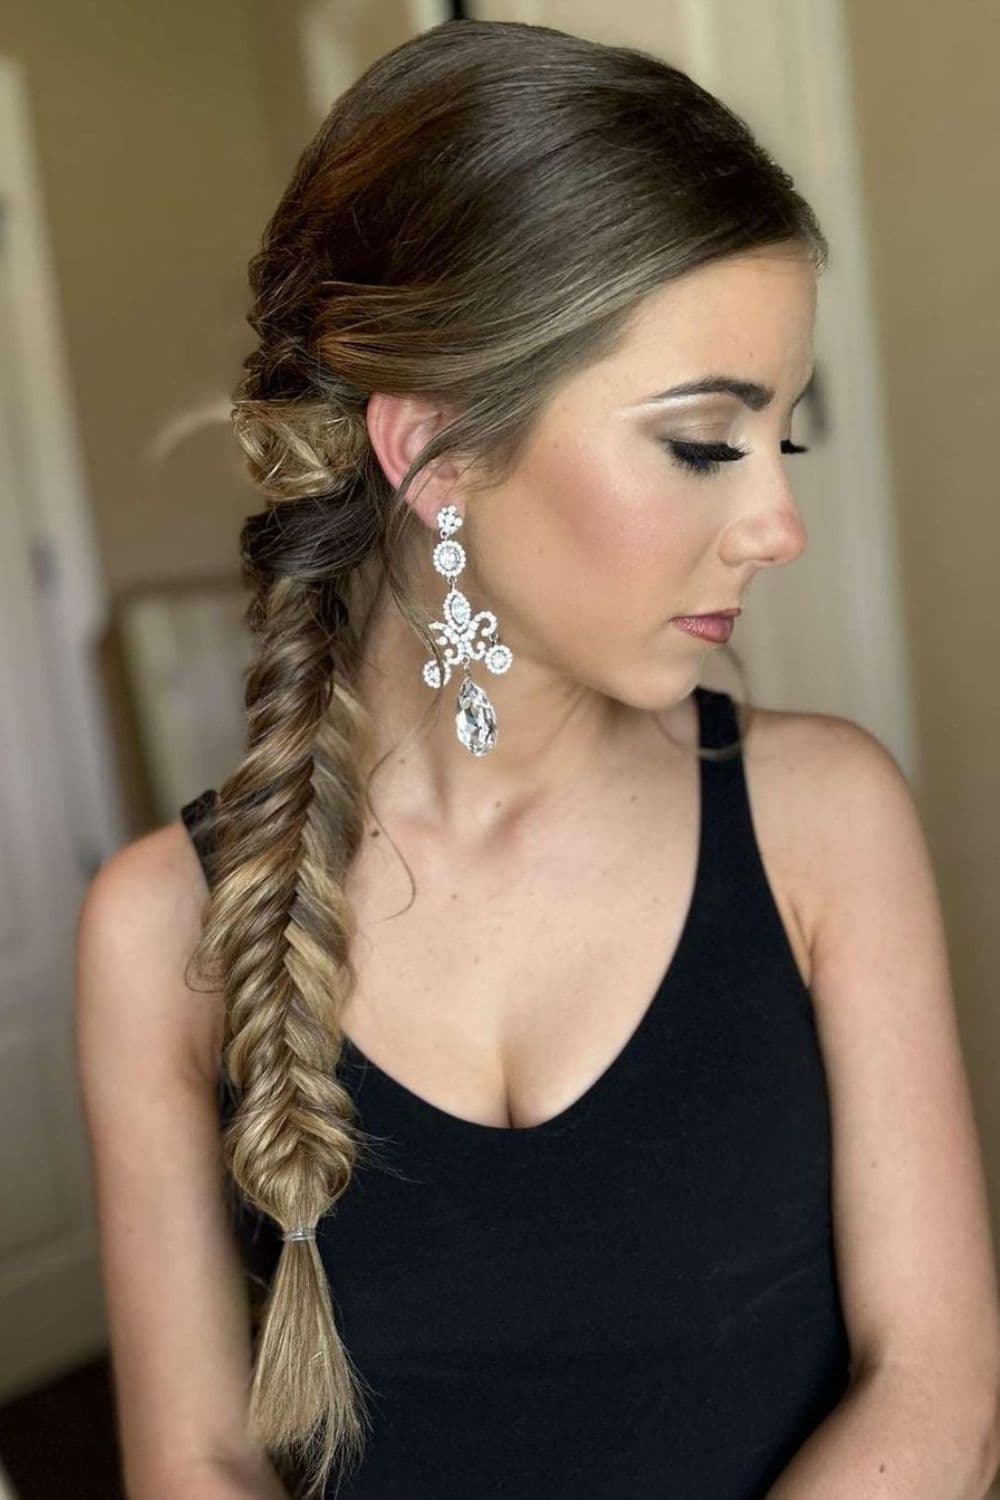 Side view of a woman wearing black tank top with a side fishtail braid.